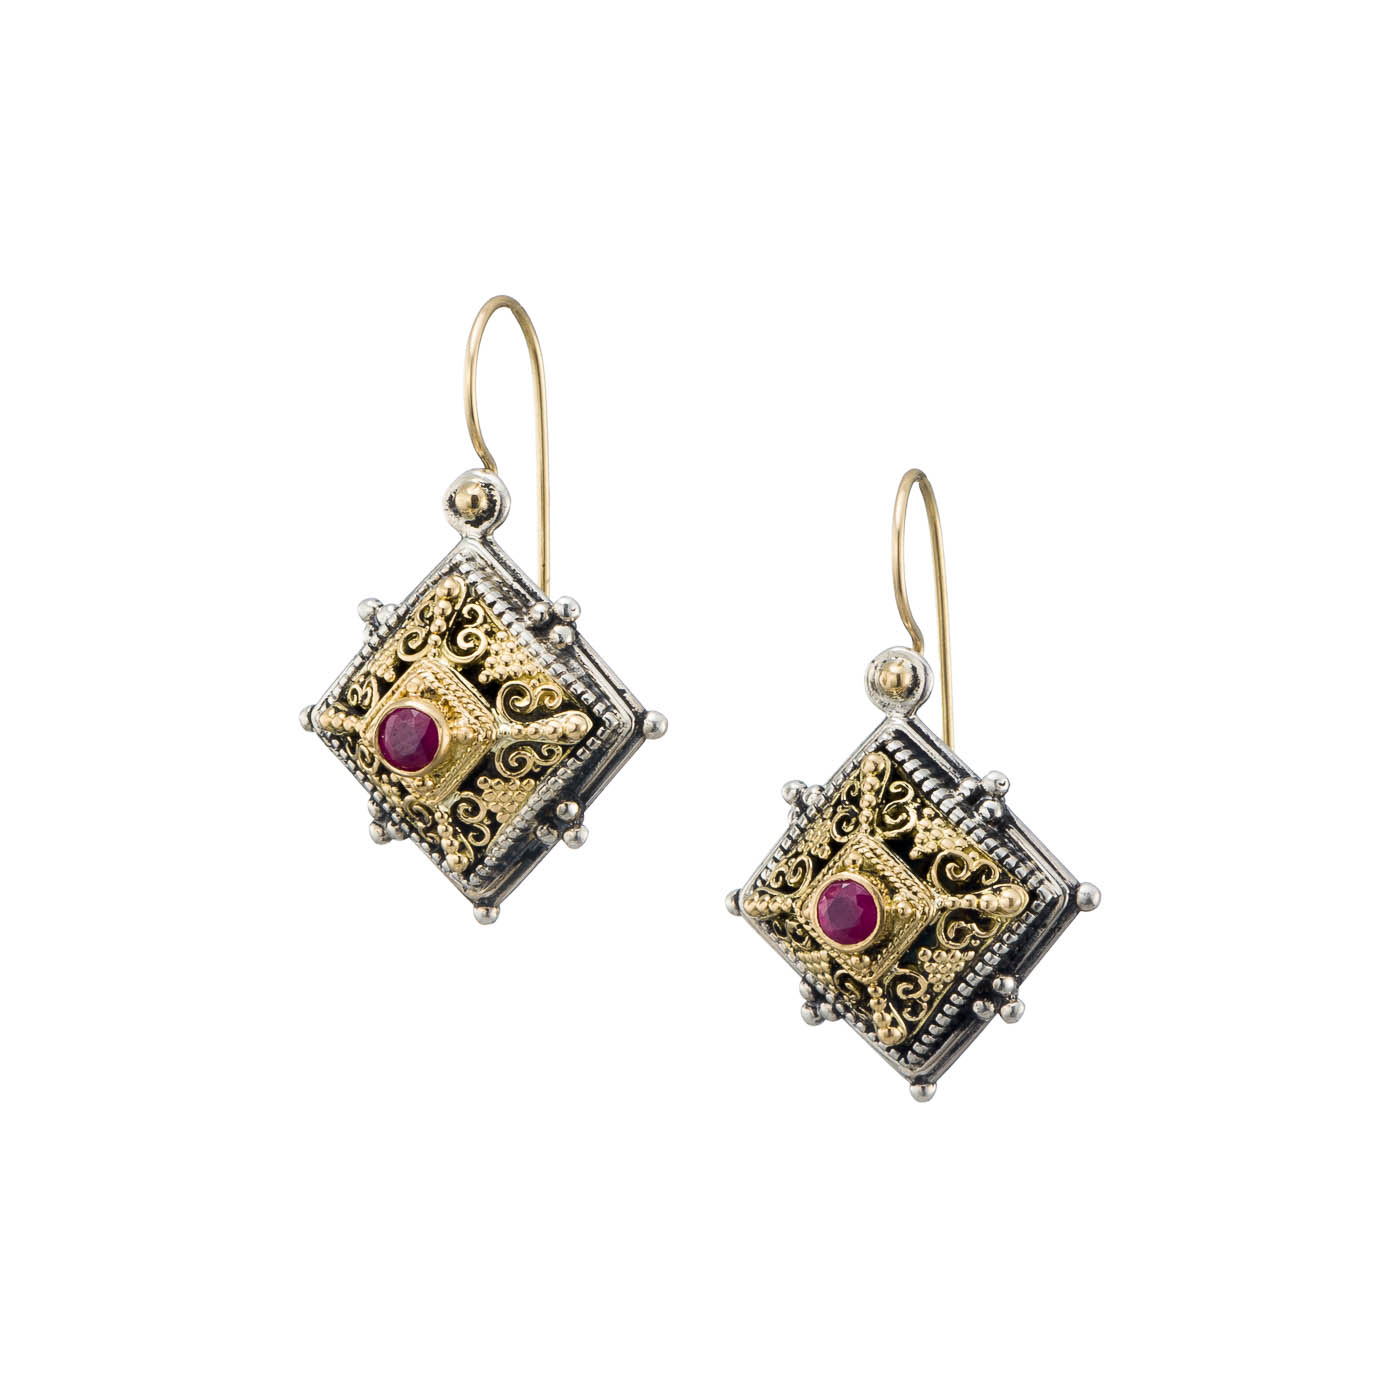 Byzantine earrings in 18K Gold and Sterling Silver with ruby